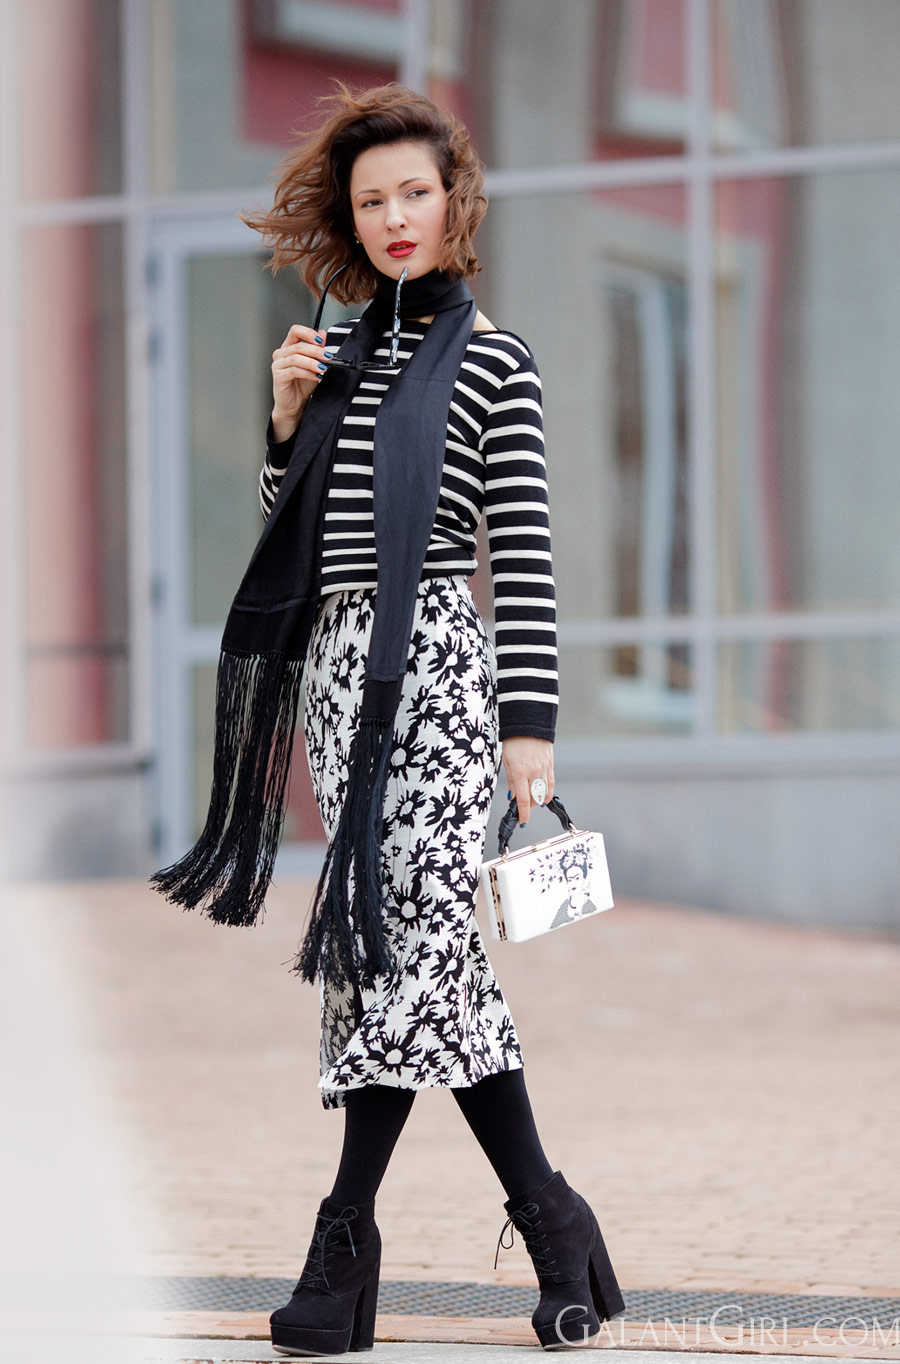 mixing prints and patterns, skinny scarves outfits, how to mix prints, playful outfit ideas, 